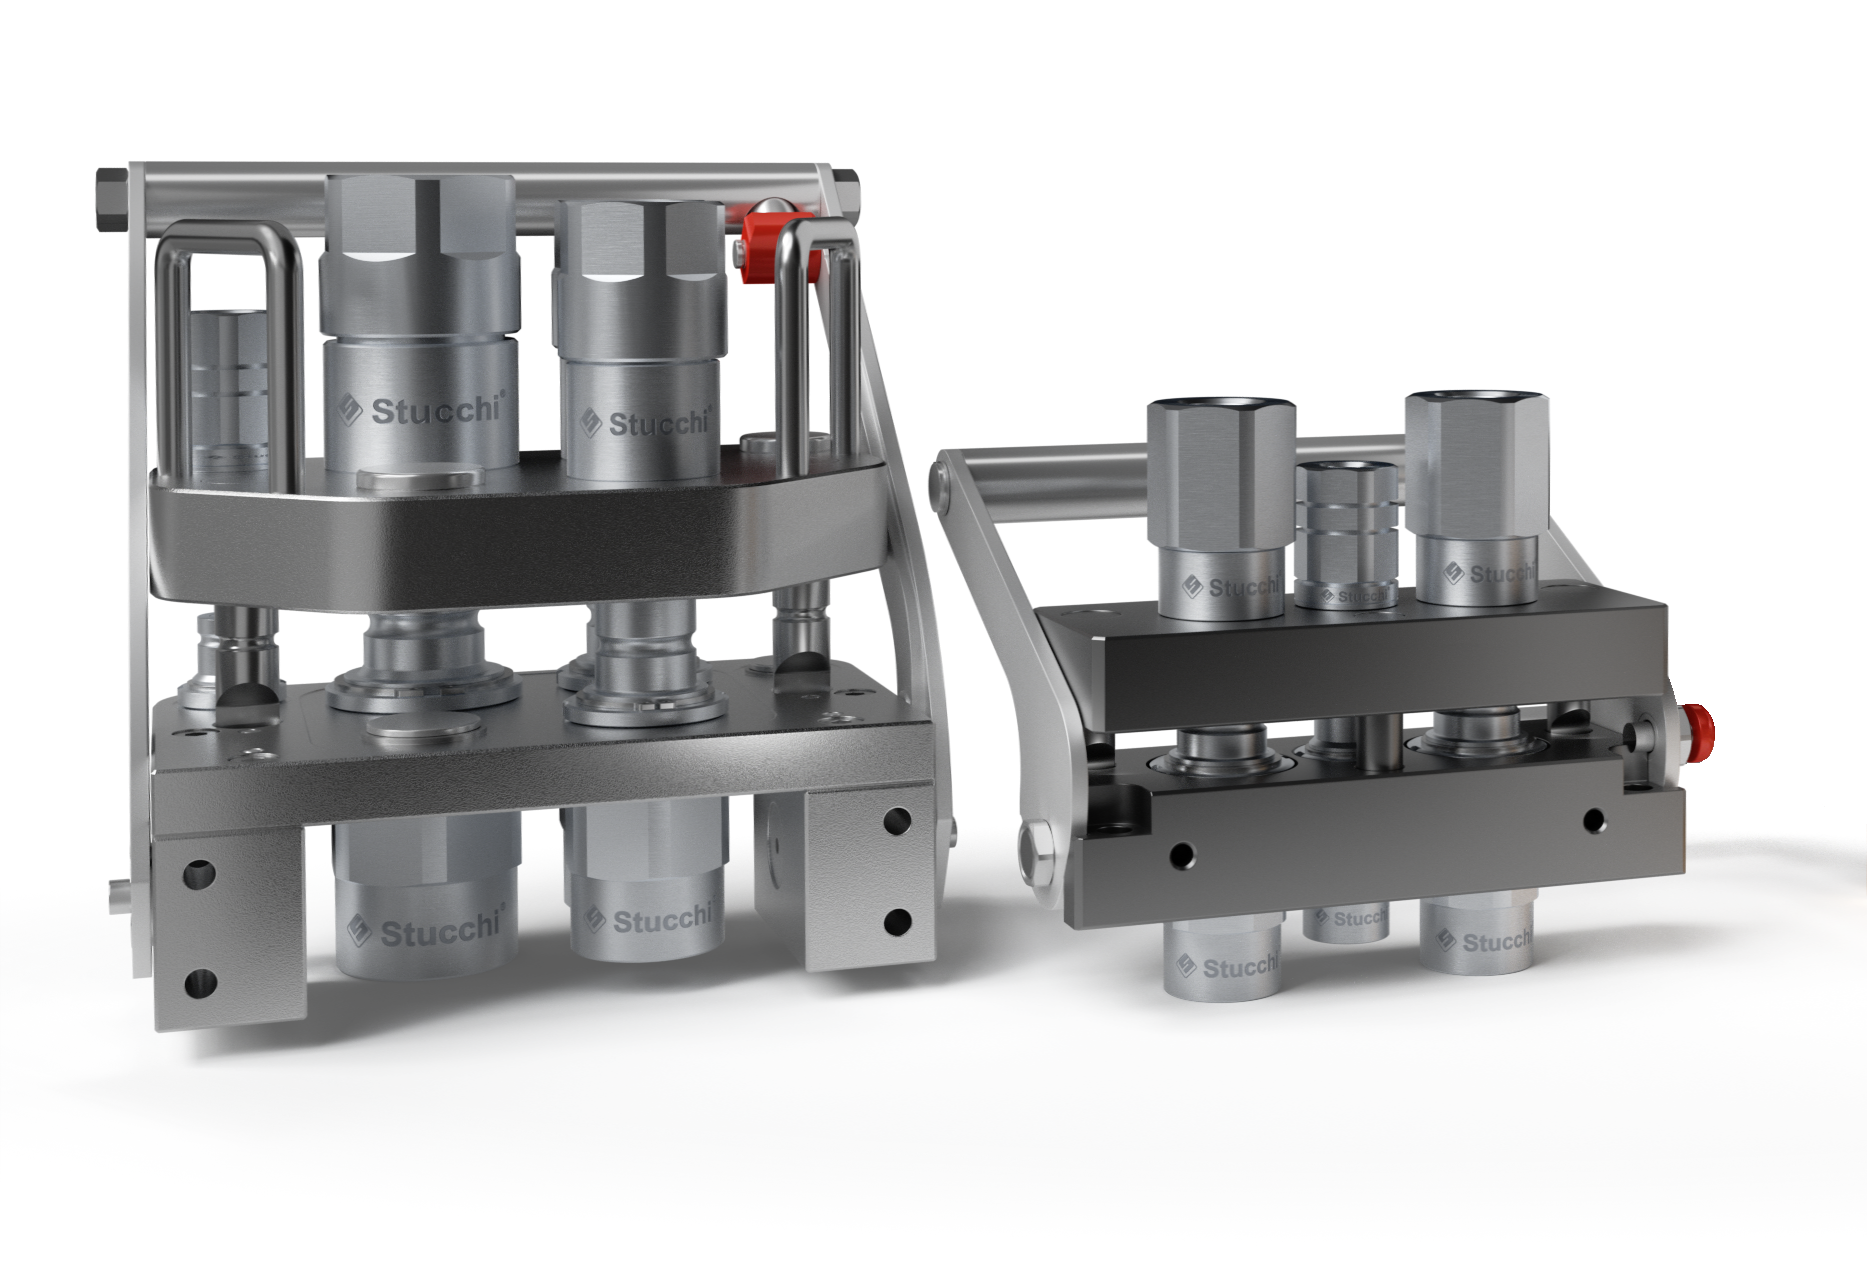 How do you choose multi-connection plates? Use the Stucchi configurator